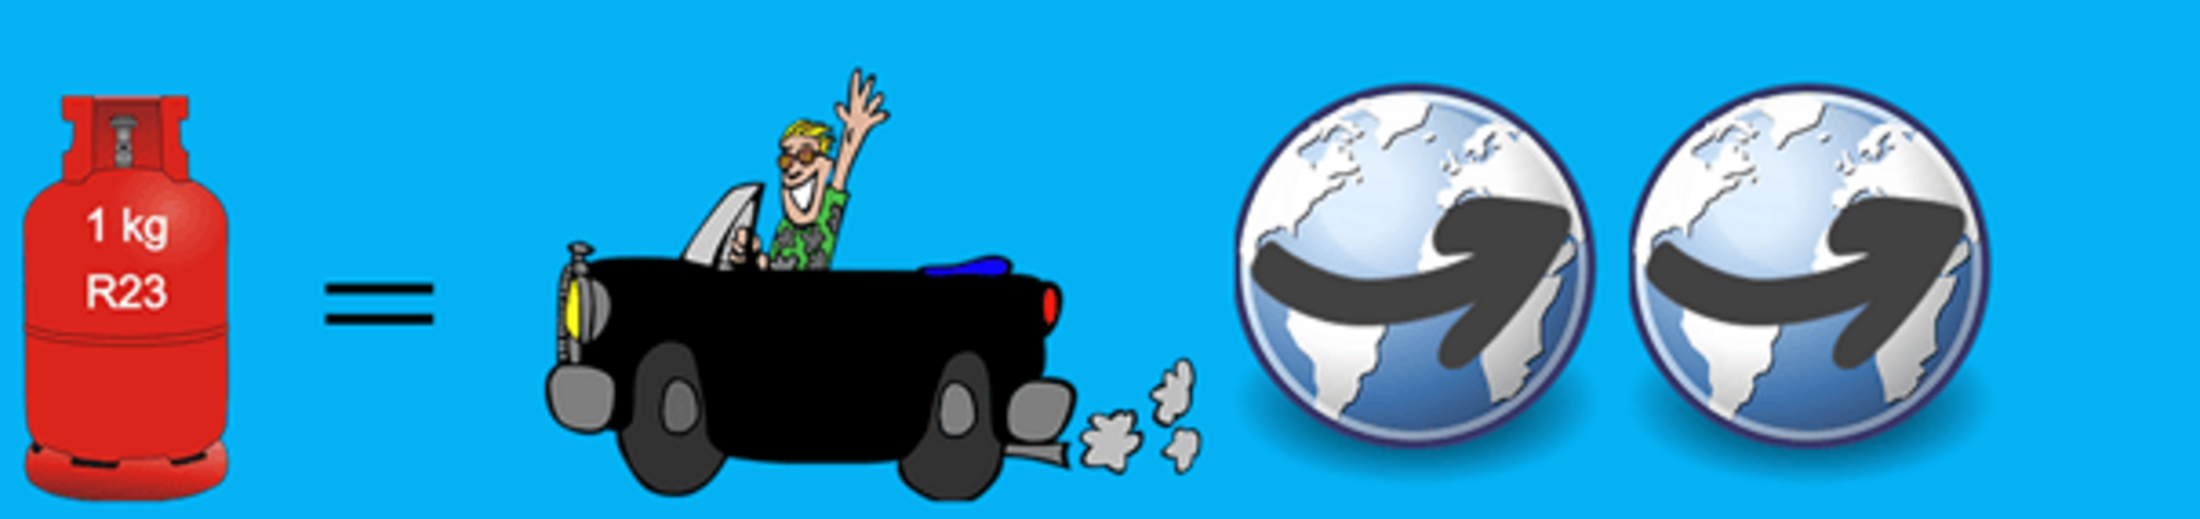 Caricature of a gas tank equals a car that can circumnavigate the earth twice